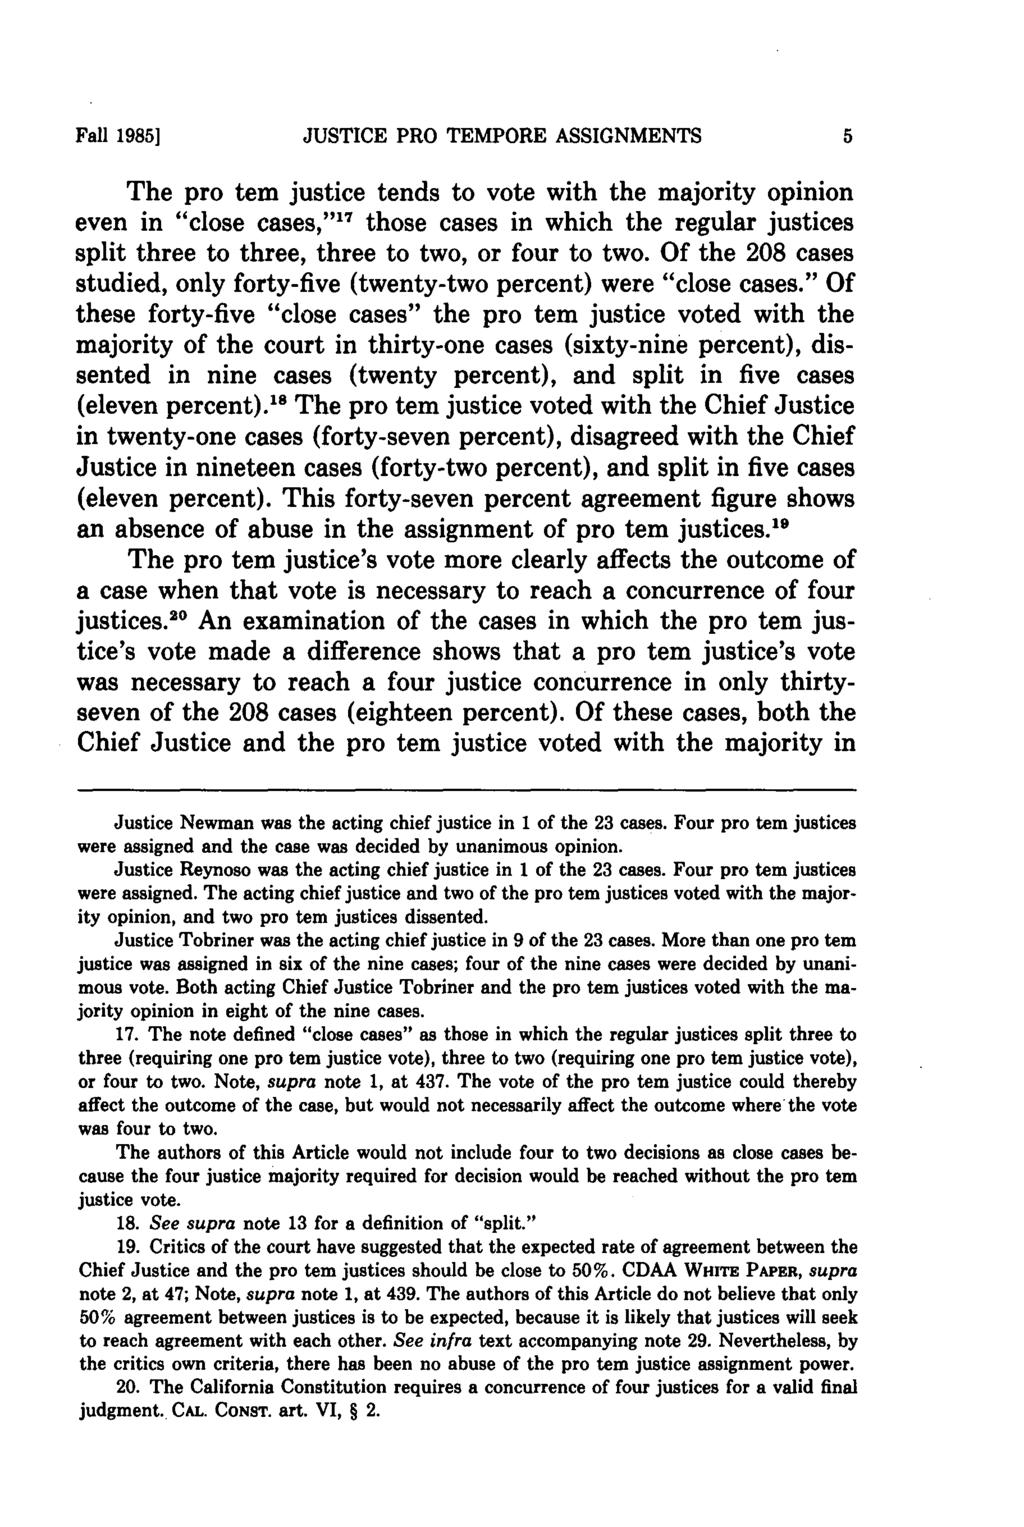 Fall 1985] JUSTICE PRO TEMPORE ASSIGNMENTS The pro tern justice tends to vote with the majority opinion even in "close cases," 7 those cases in which the regular justices split three to three, three